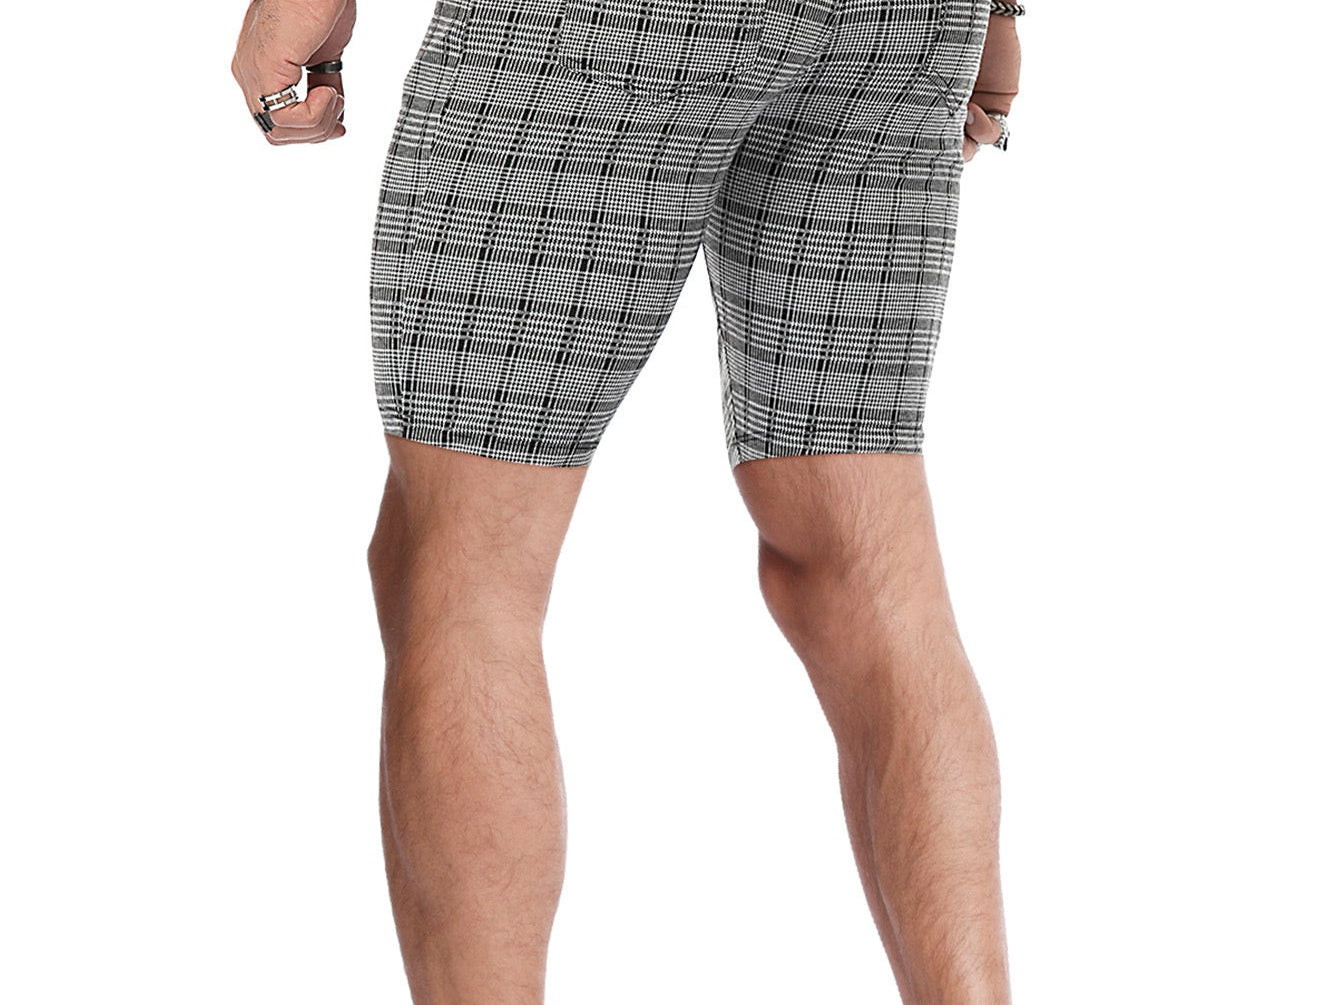 Kind - Shorts for Men - Sarman Fashion - Wholesale Clothing Fashion Brand for Men from Canada